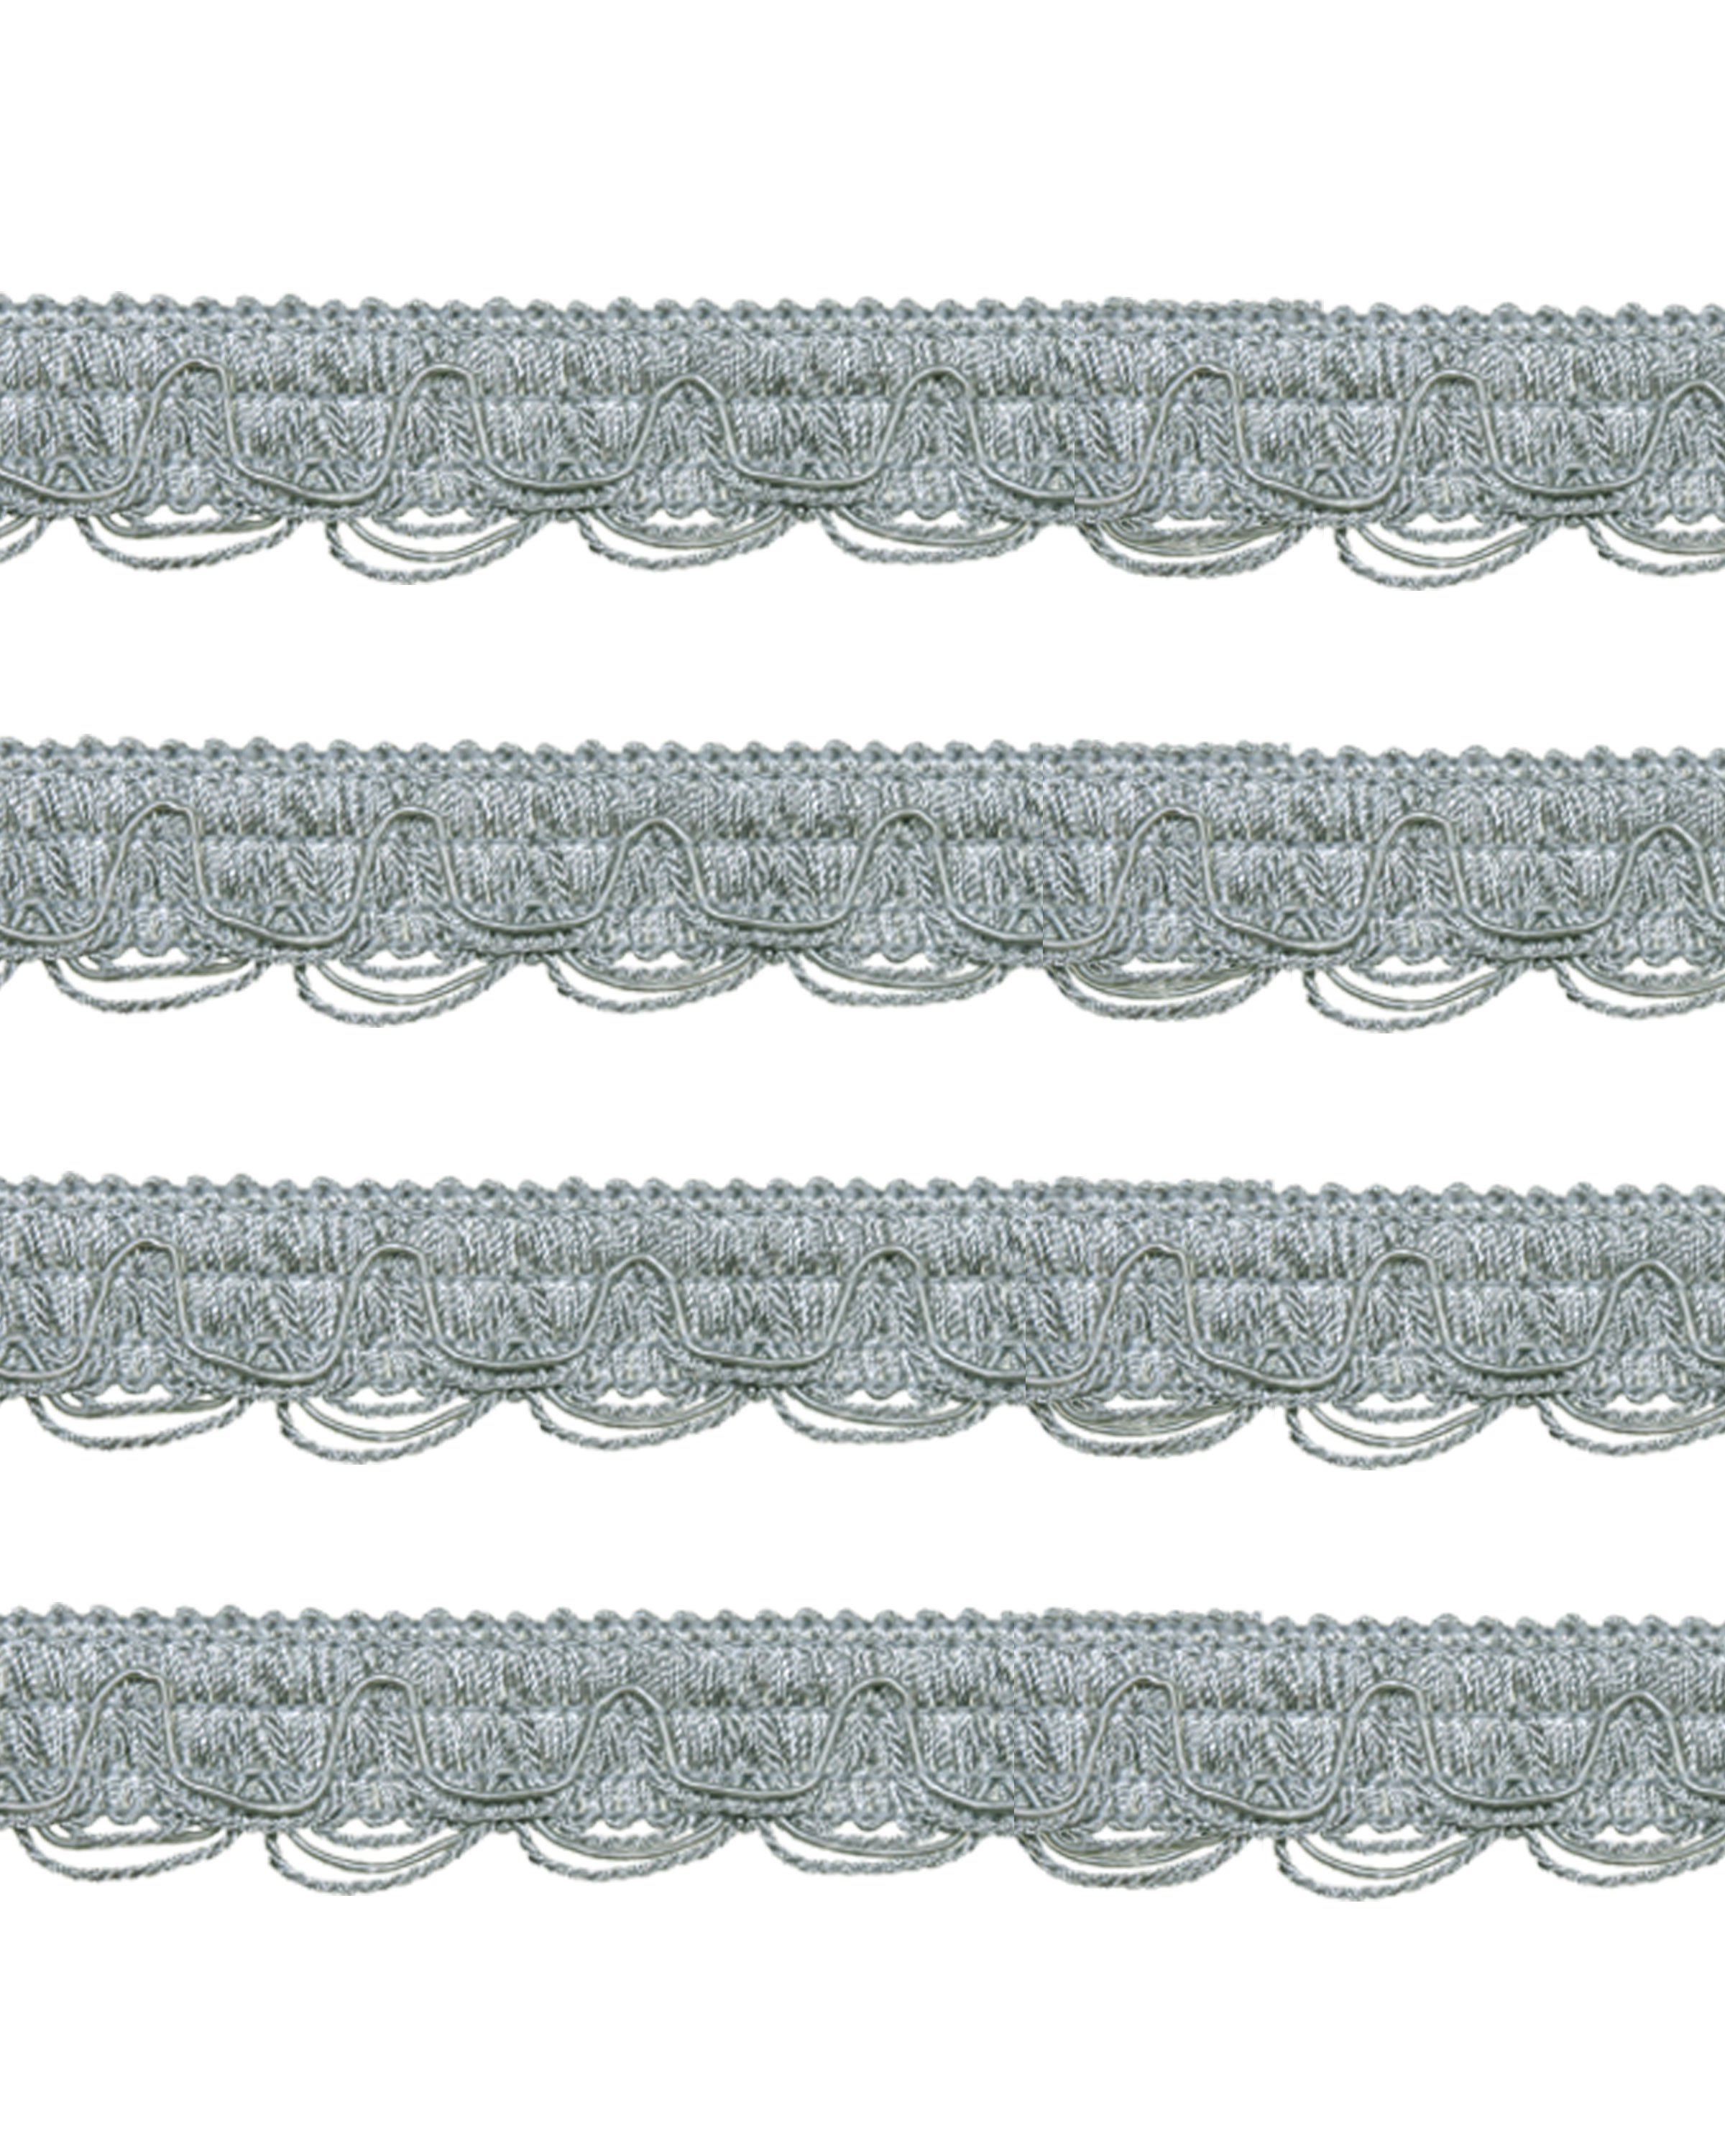 Scalloped Looped Braid - French Silver Blue 28mm Price is for 5 metres